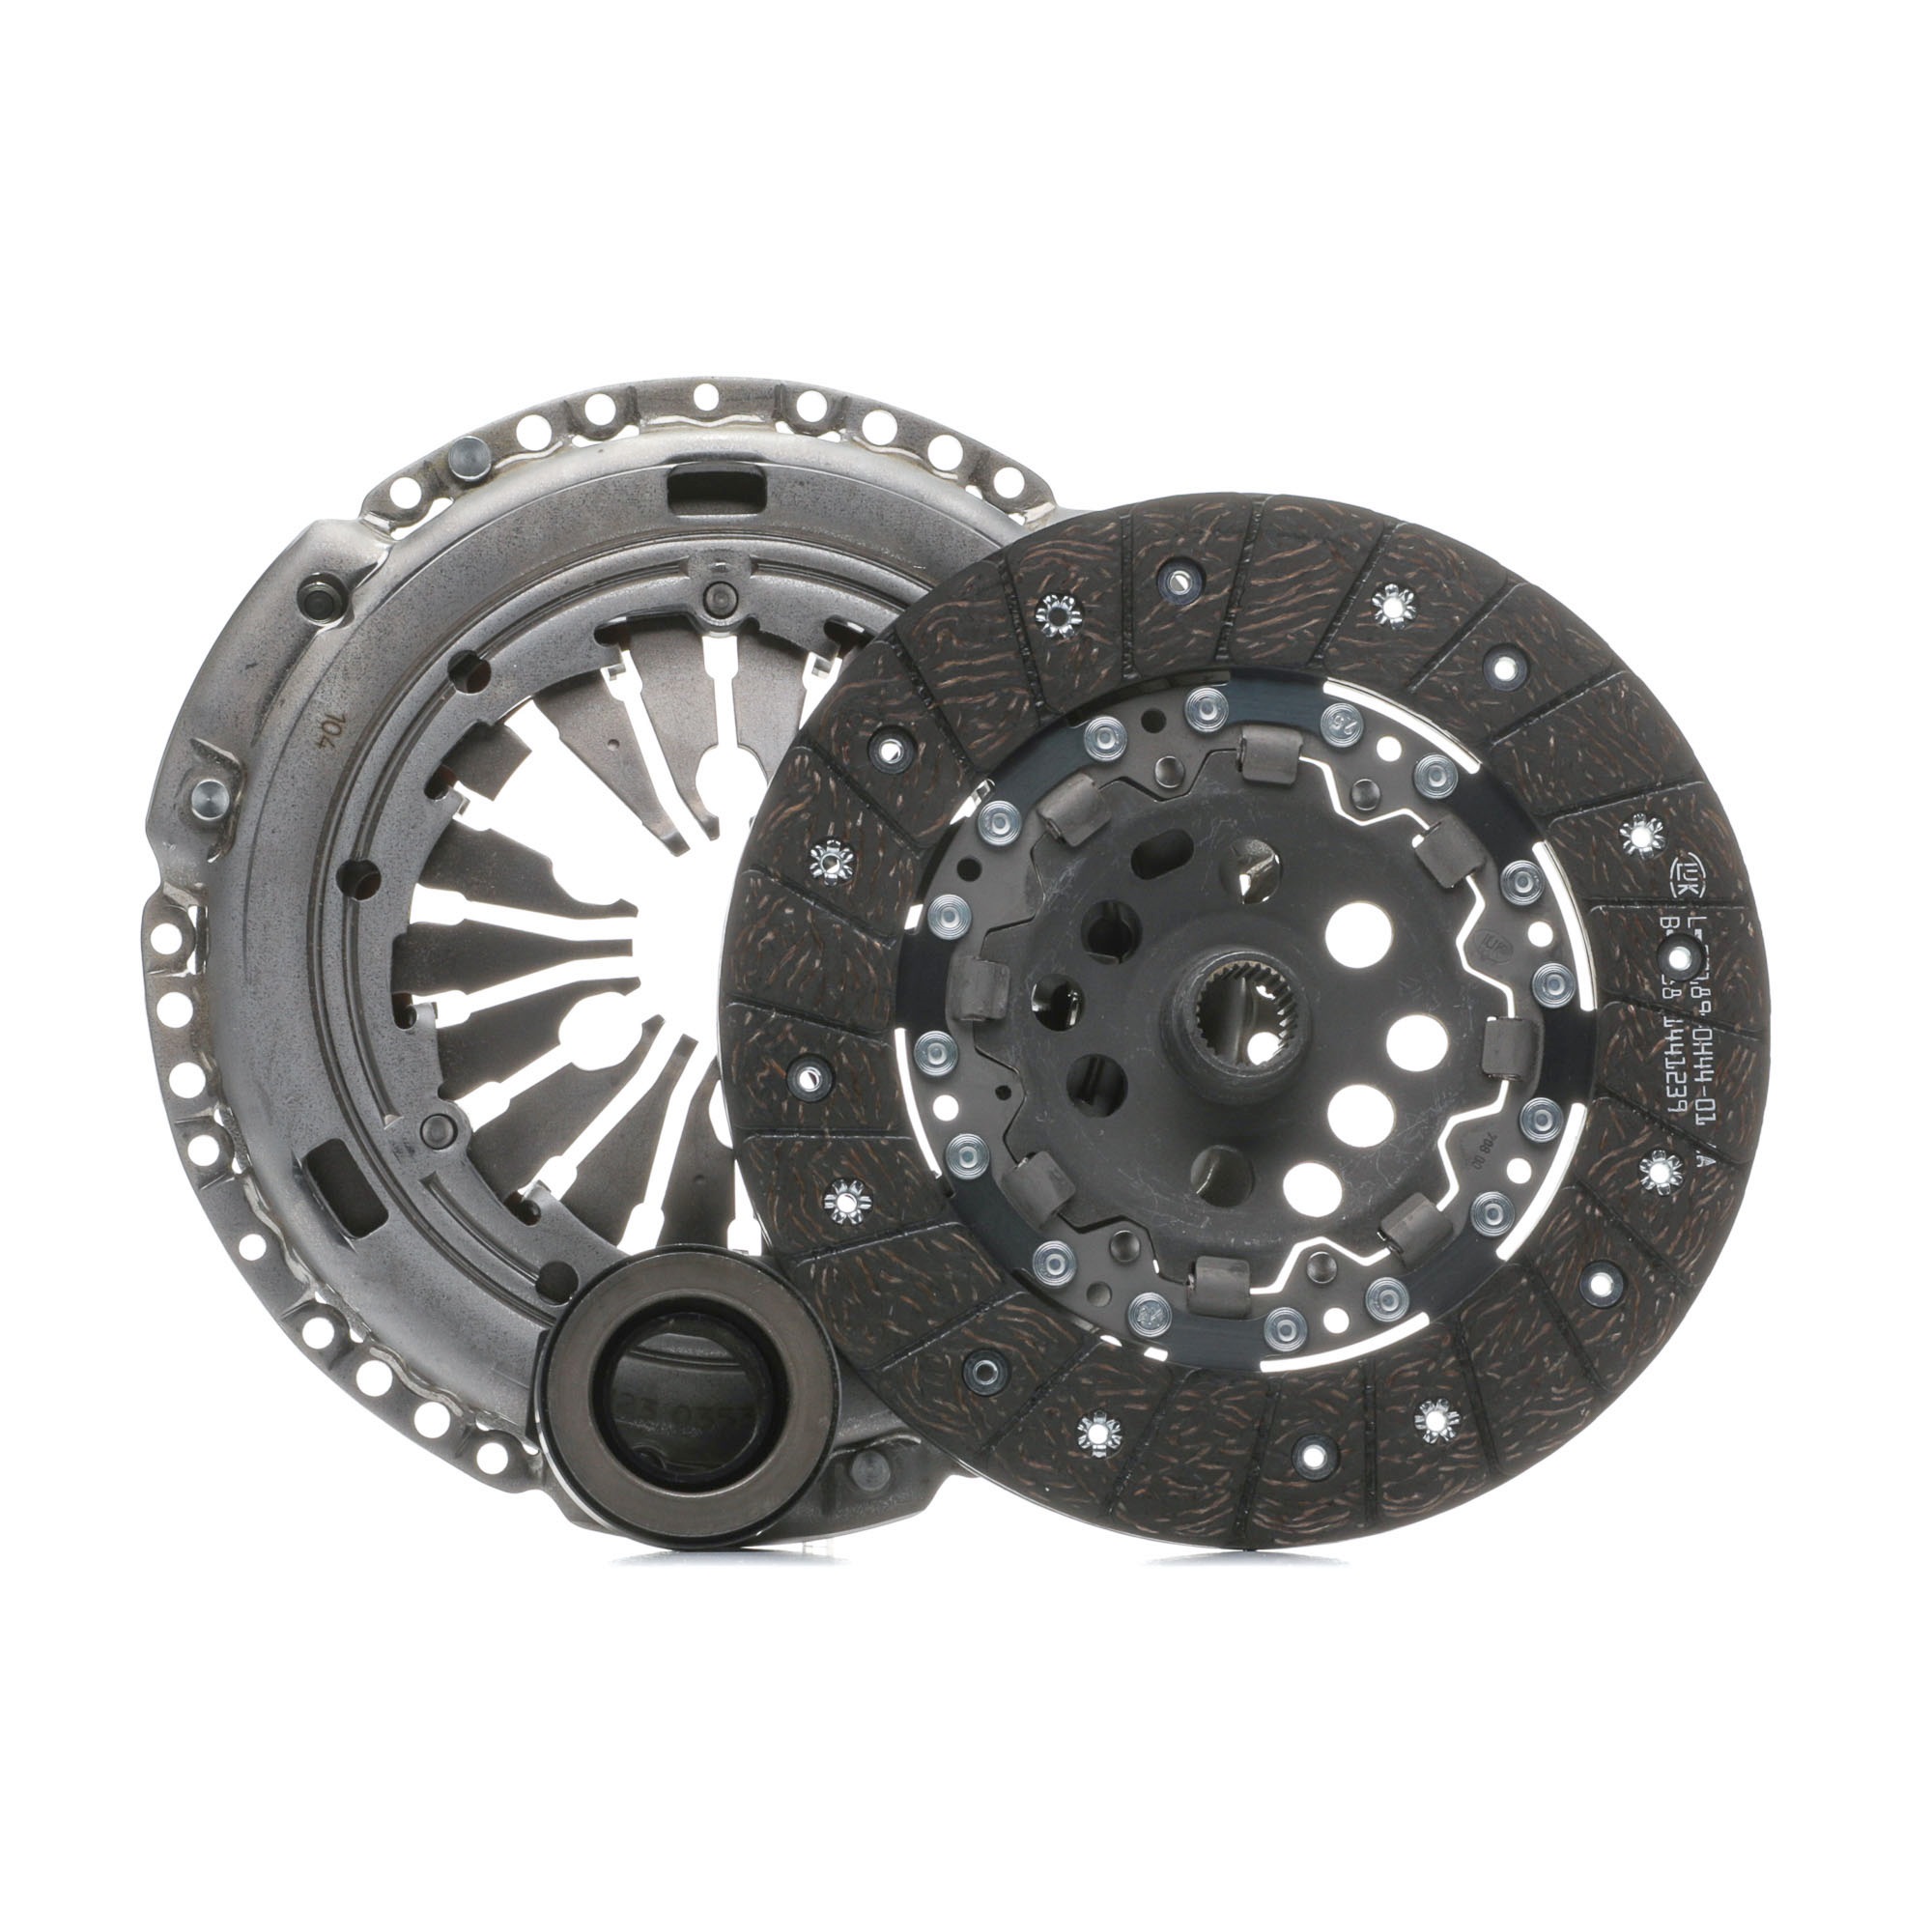 LuK BR 0222 623 3047 00 Clutch kit for engines with dual-mass flywheel, with clutch release bearing, with clutch disc, Check and replace dual-mass flywheel if necessary., 230mm